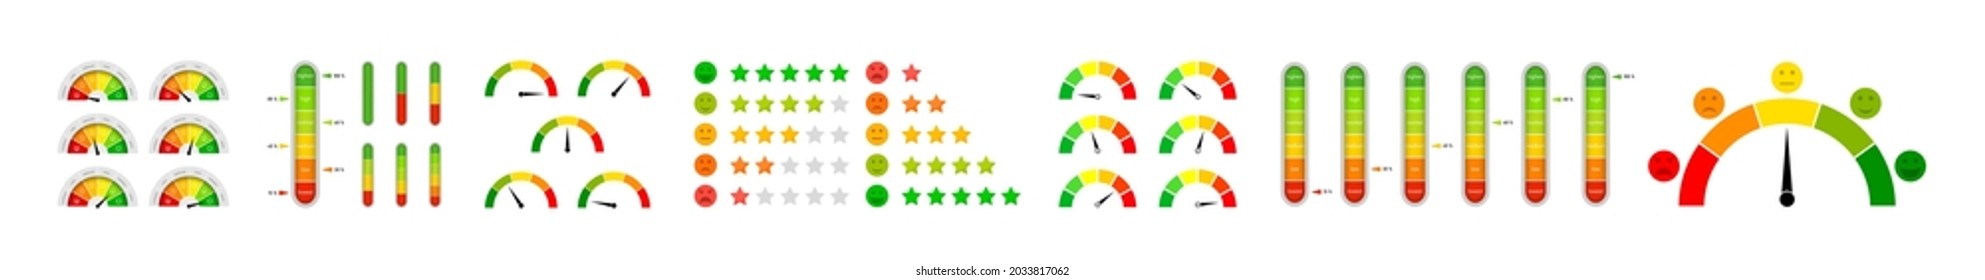 Meter of satisfaction. Scale with gauge and level of satisfaction customer. Dial with chart of smile, sad, stress and happy icon. Speedometer with positive and bad emoticon. Survey of opinion. Vector.